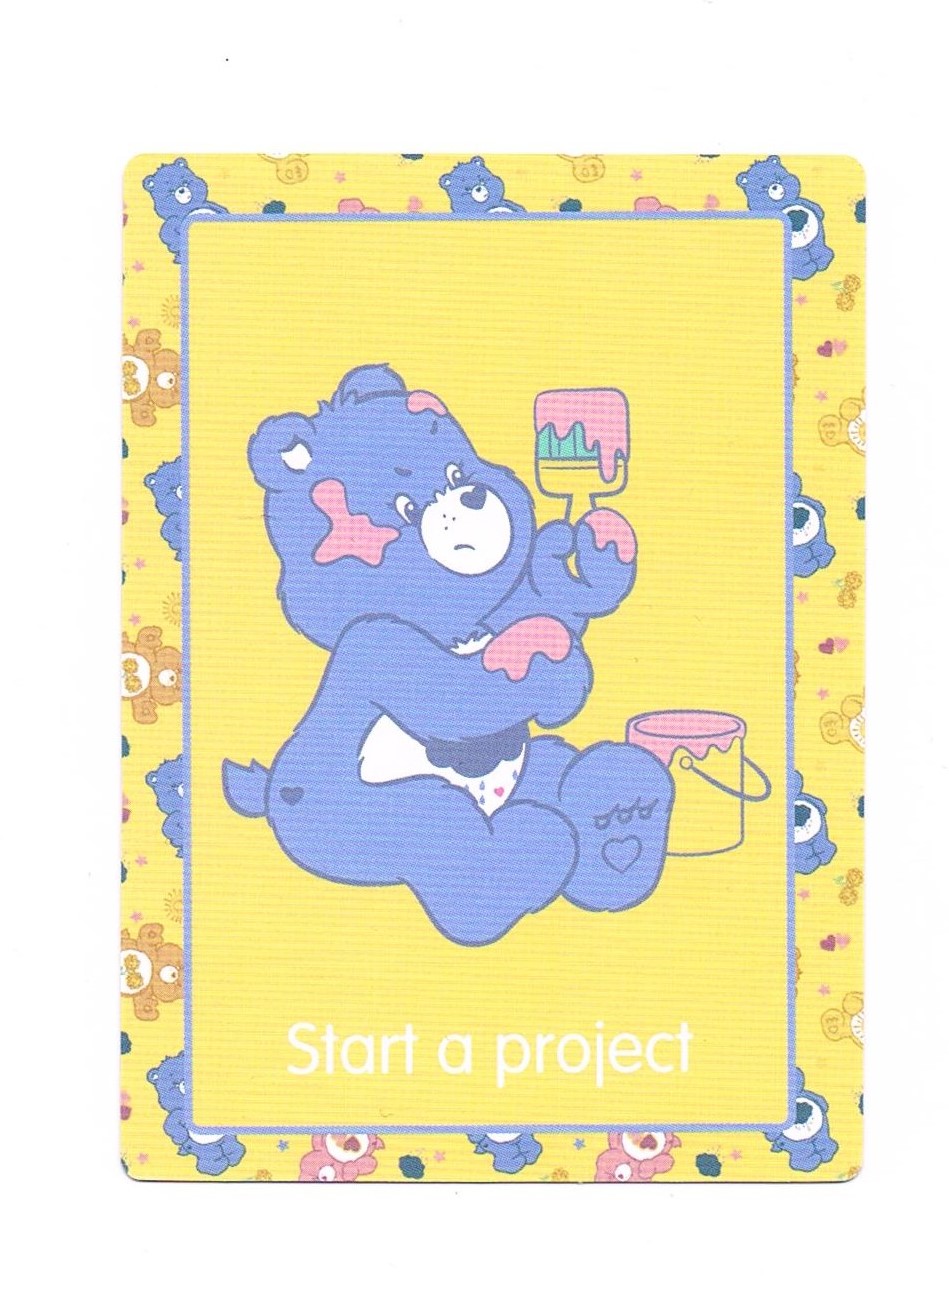 02. start a project